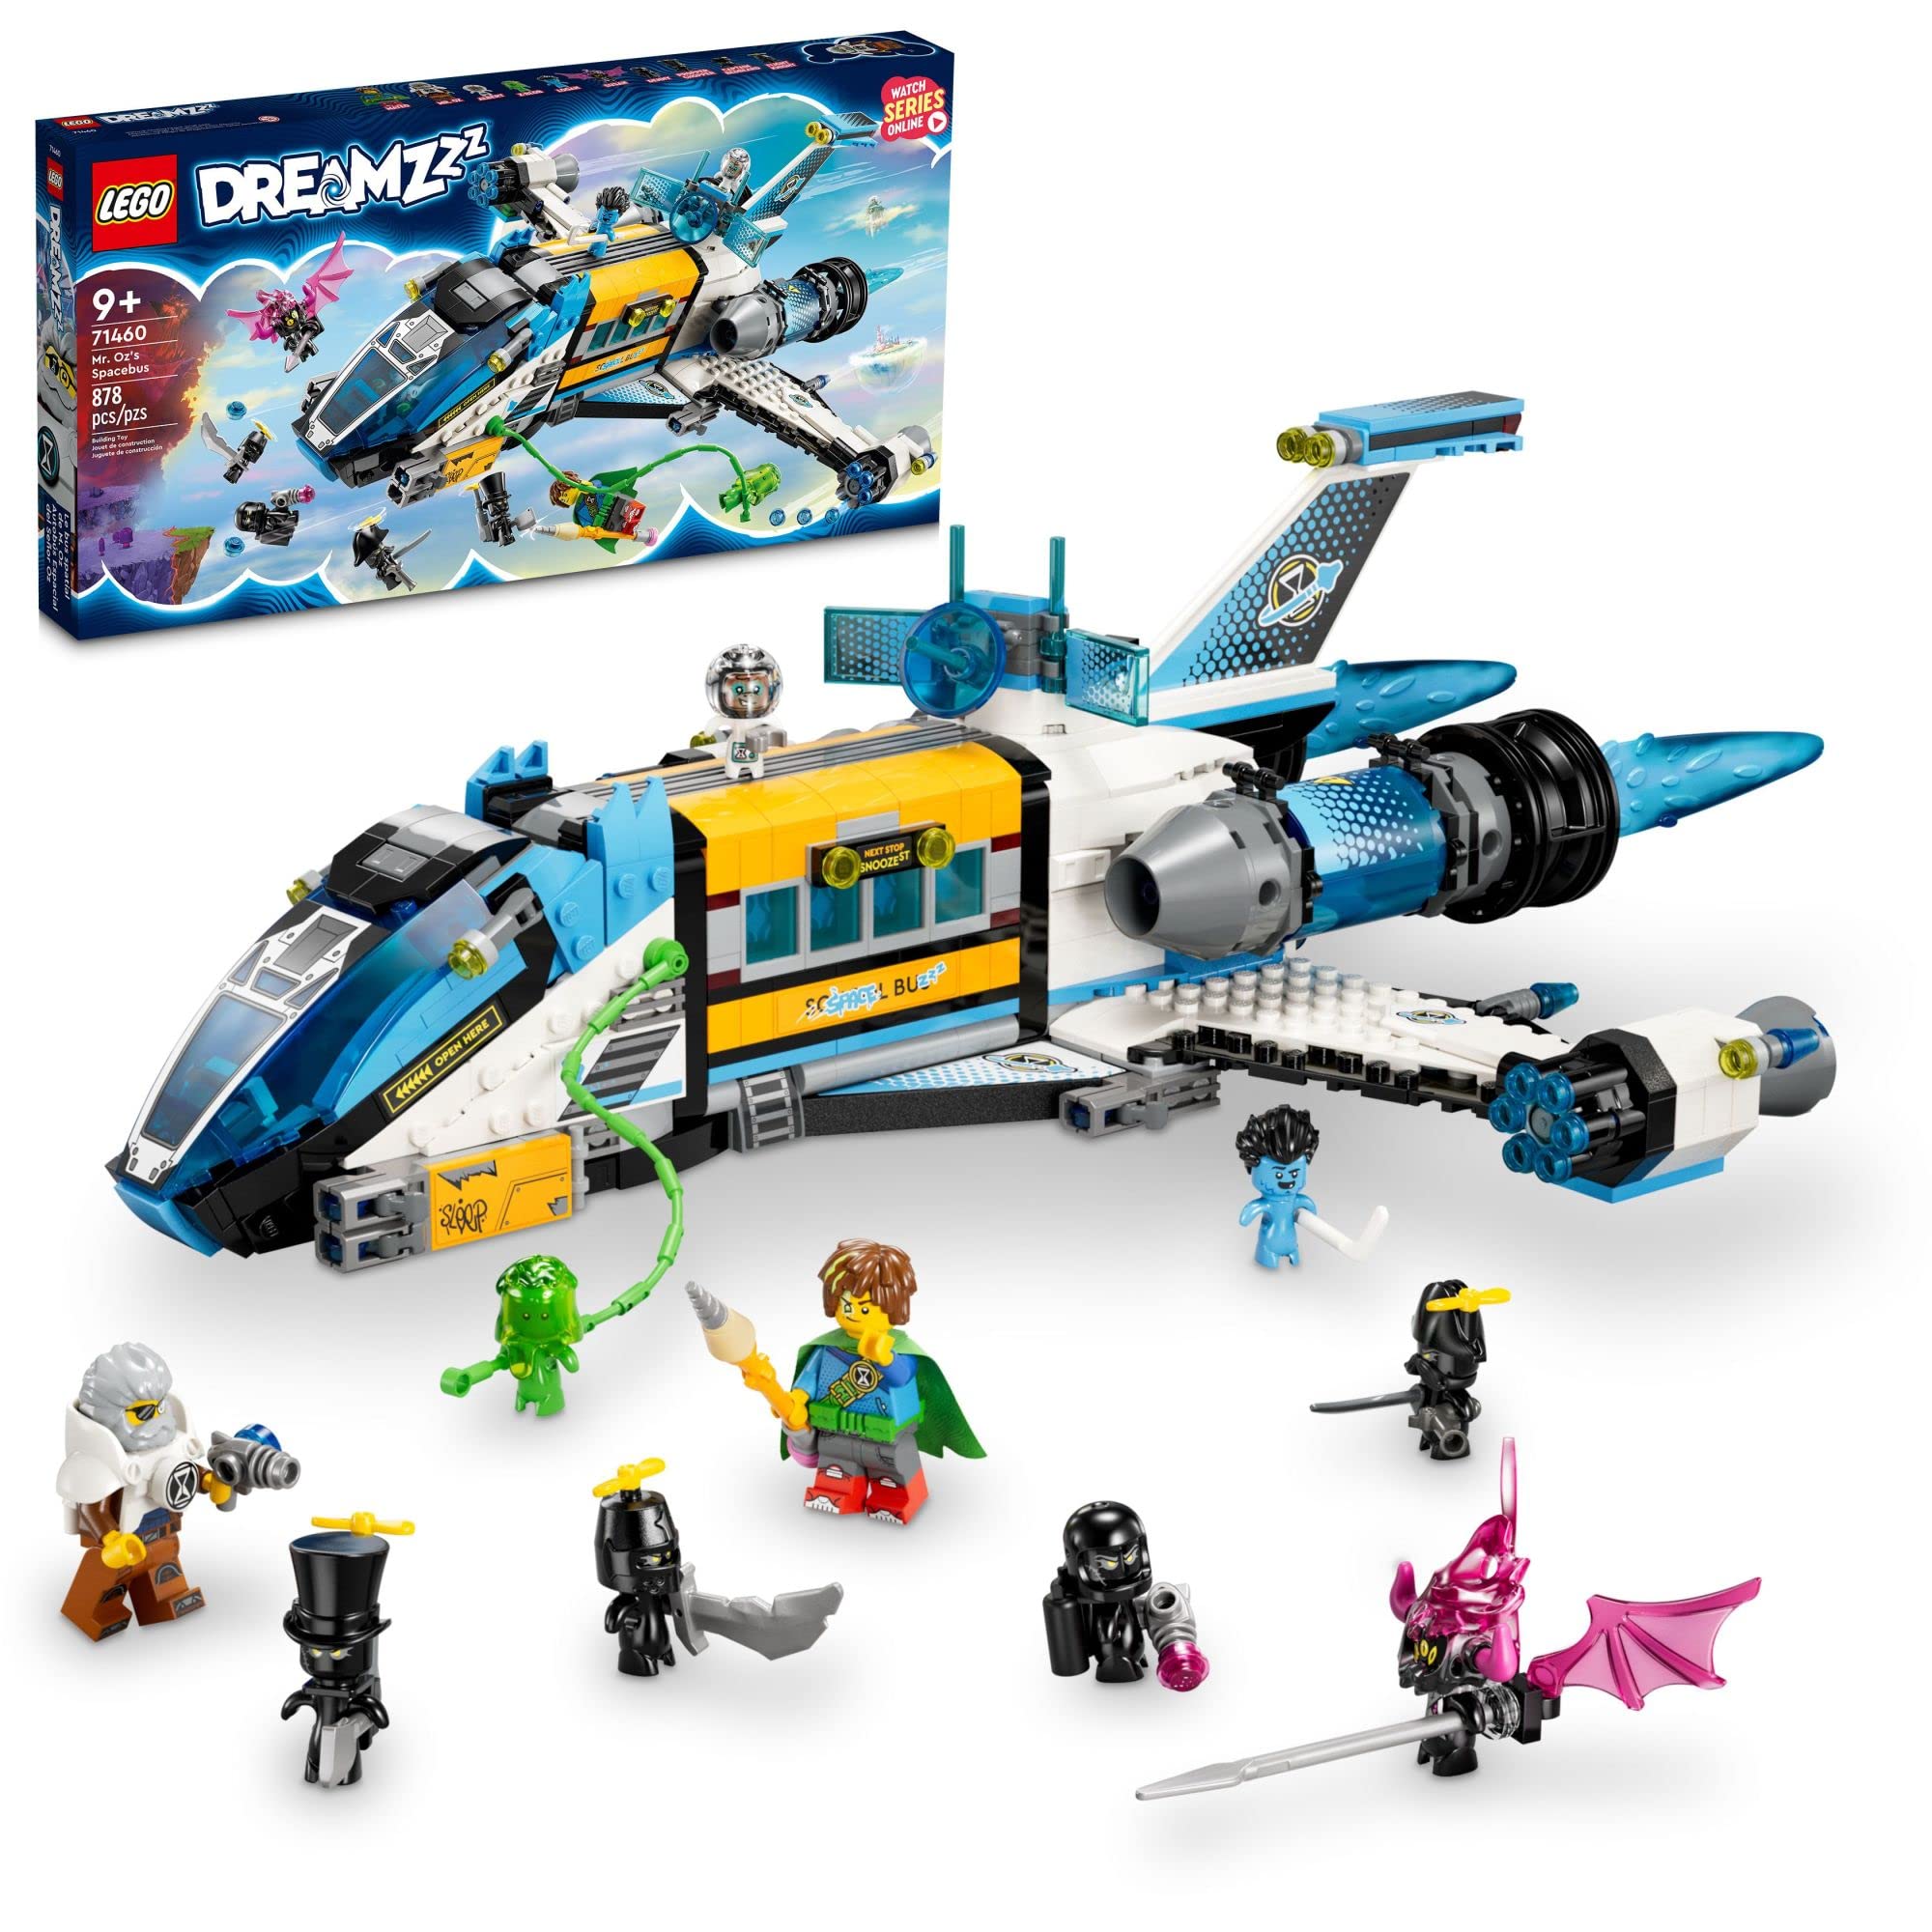 LEGO DREAMZzz Mr. Oz’s Spacebus 71460 Building Set, Spaceship Toy for Kids, Space Shuttle School Bus, Unique Space Travel Gift for 9+ Year Olds